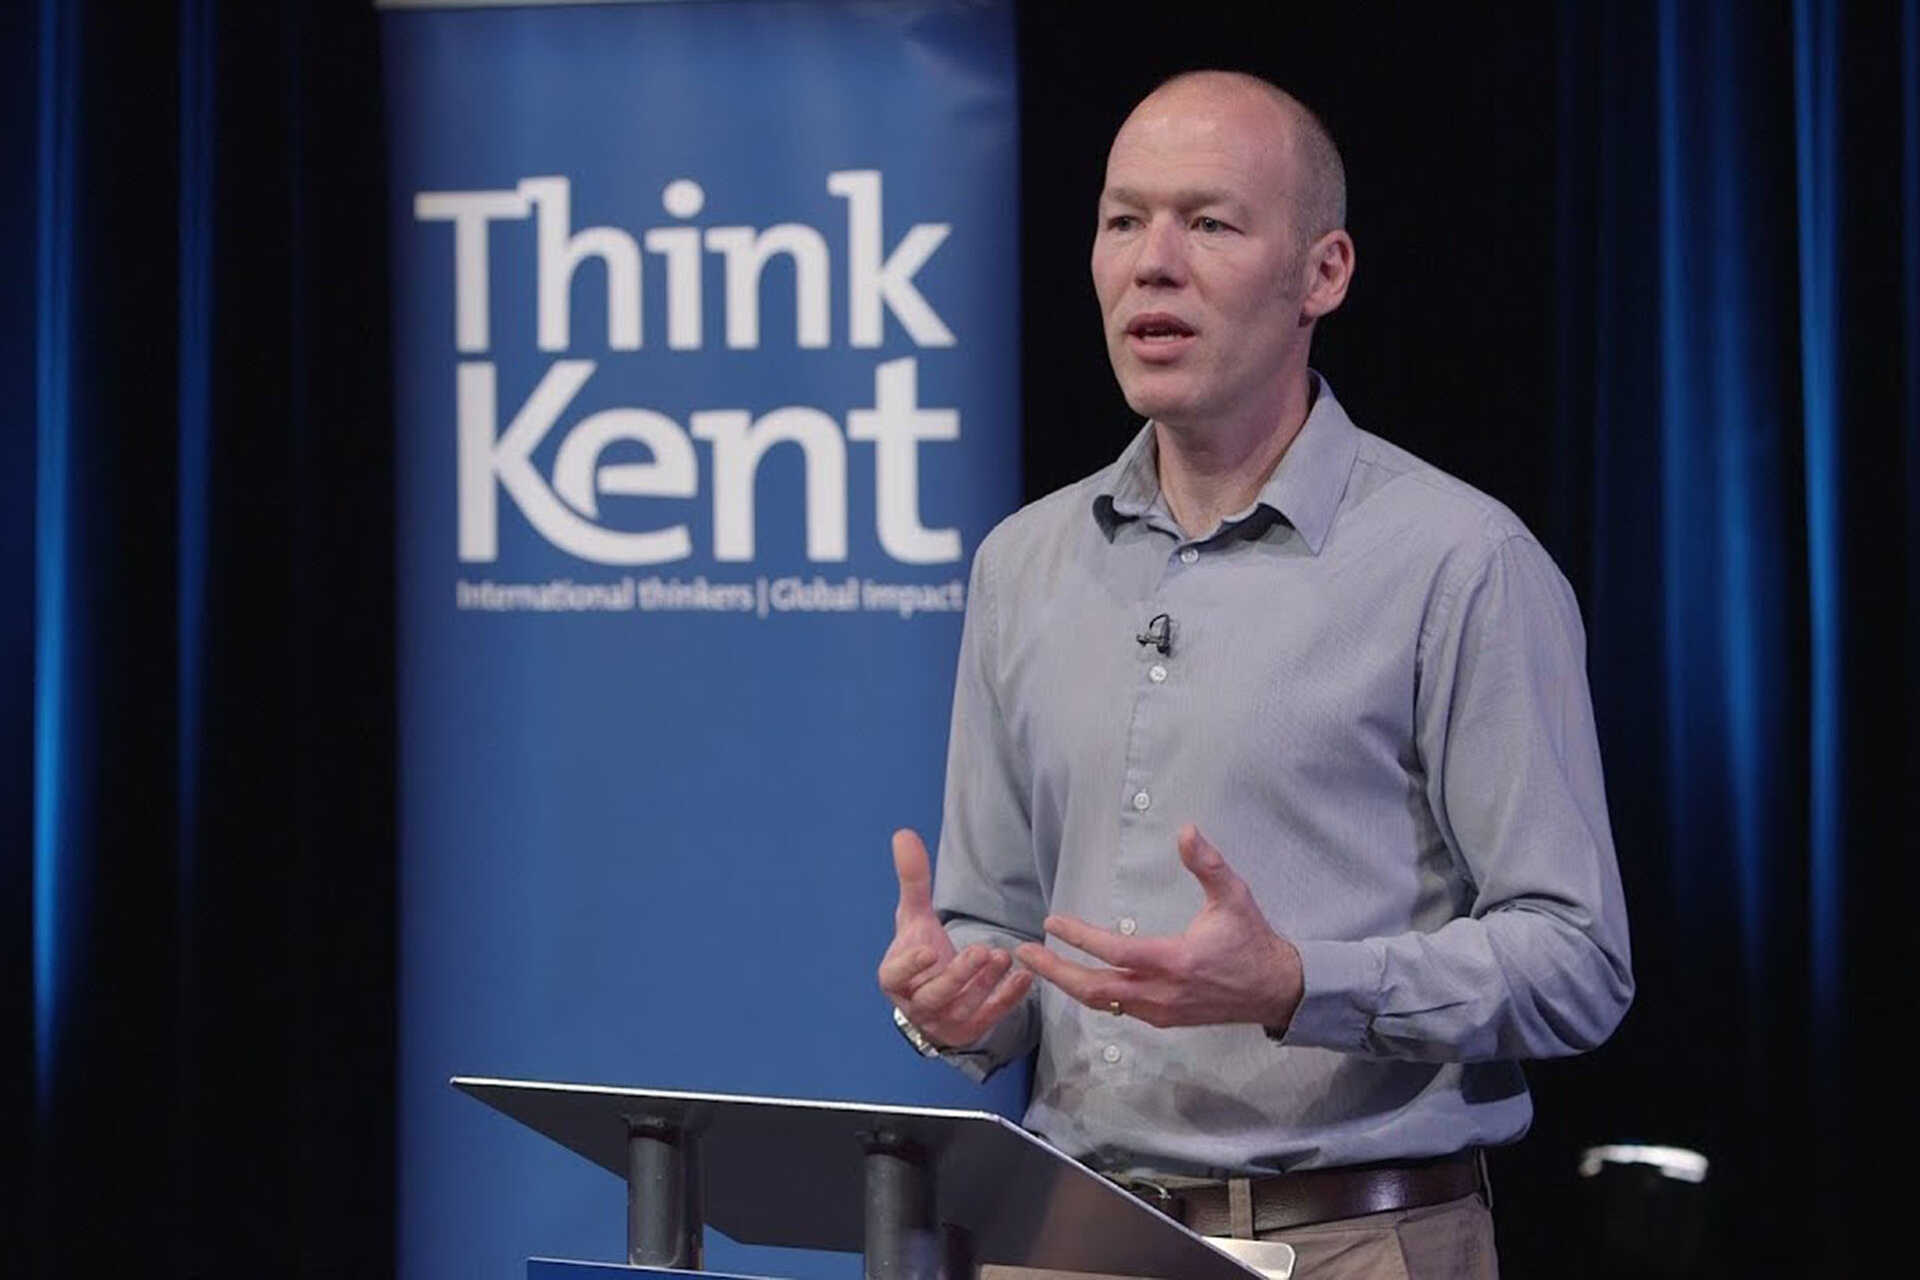 Dr Ben Cocking giving a lecture with Think a Kent banner in the background